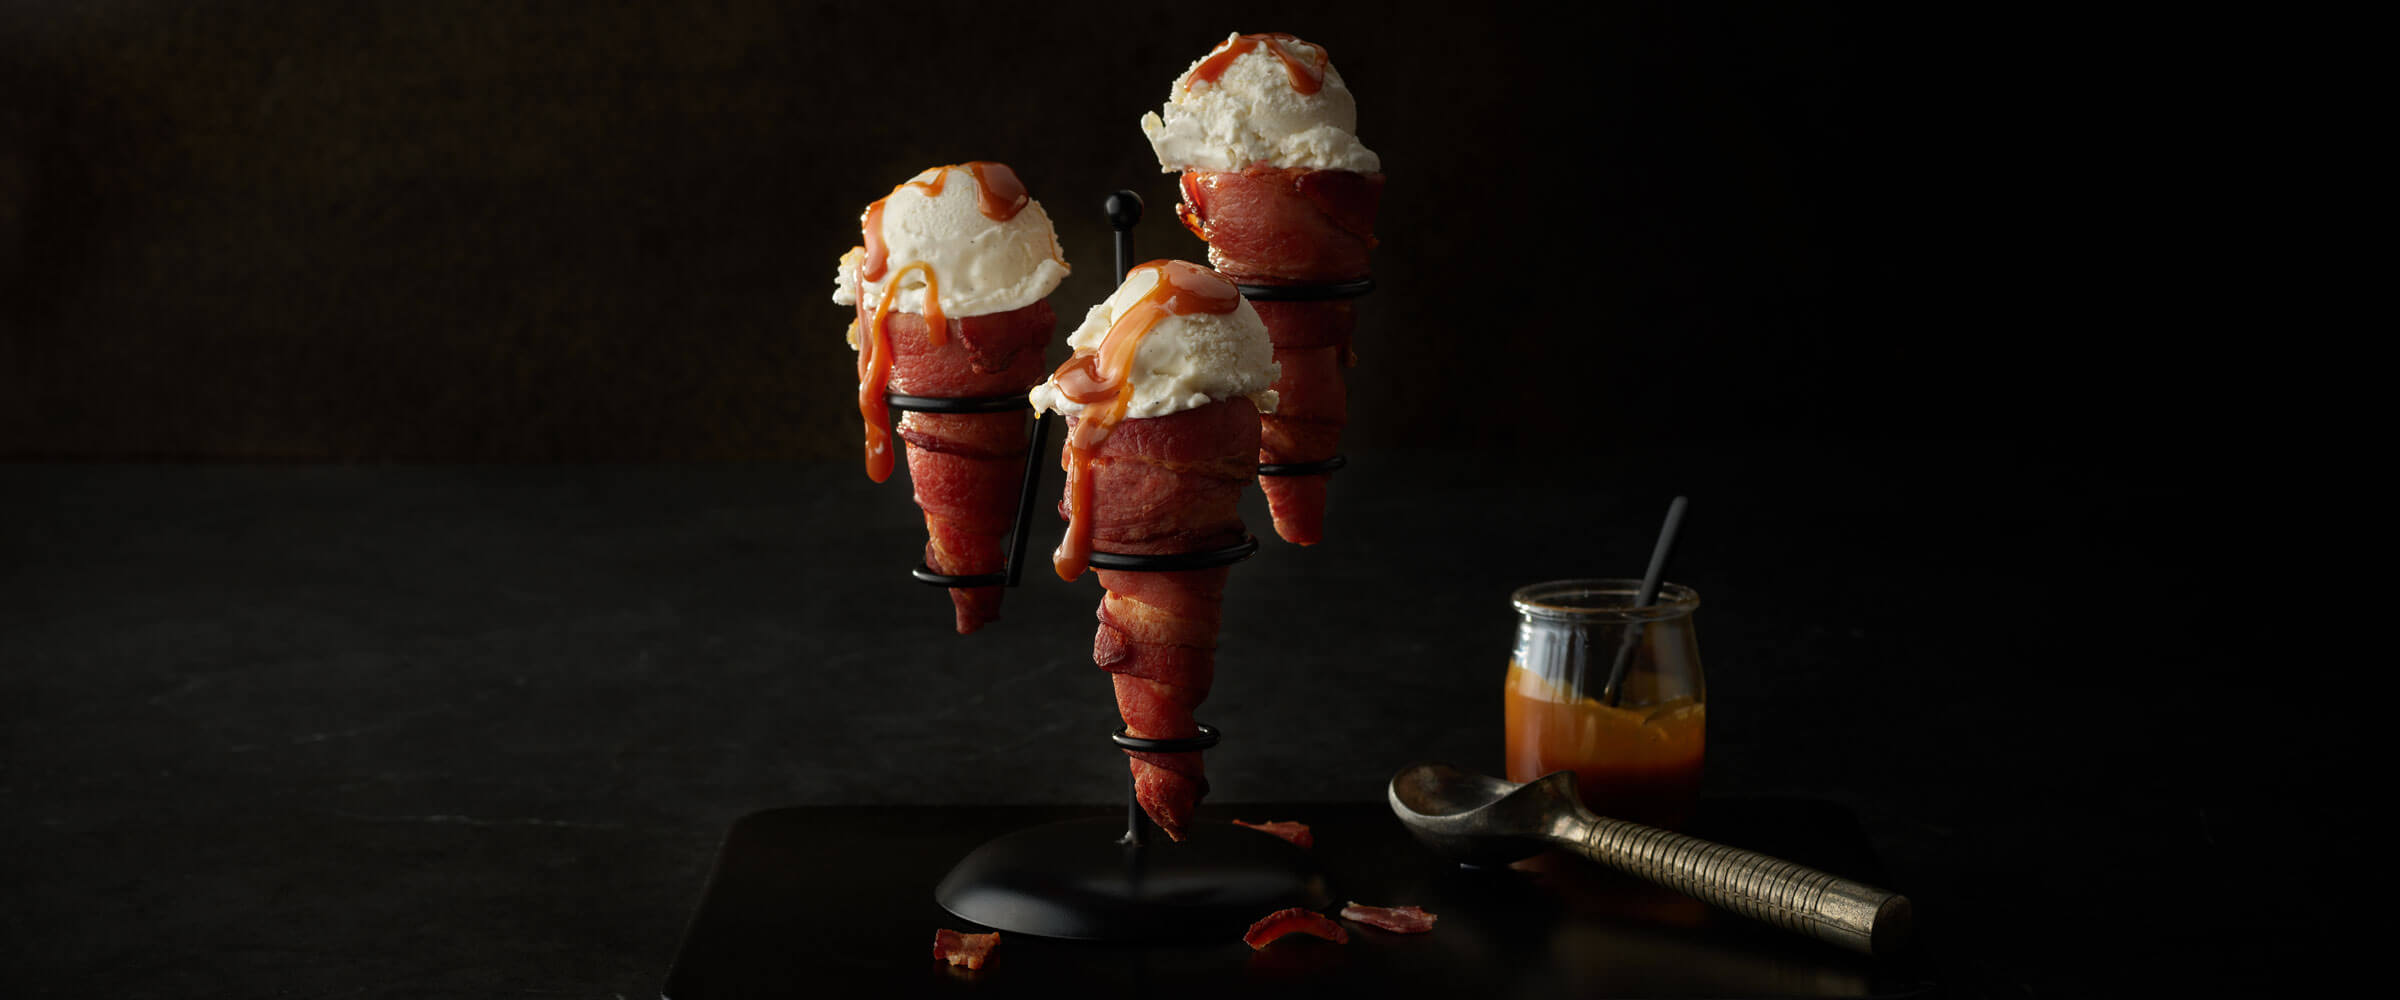 Bacon Ice Cream Cone drizzled with caramel